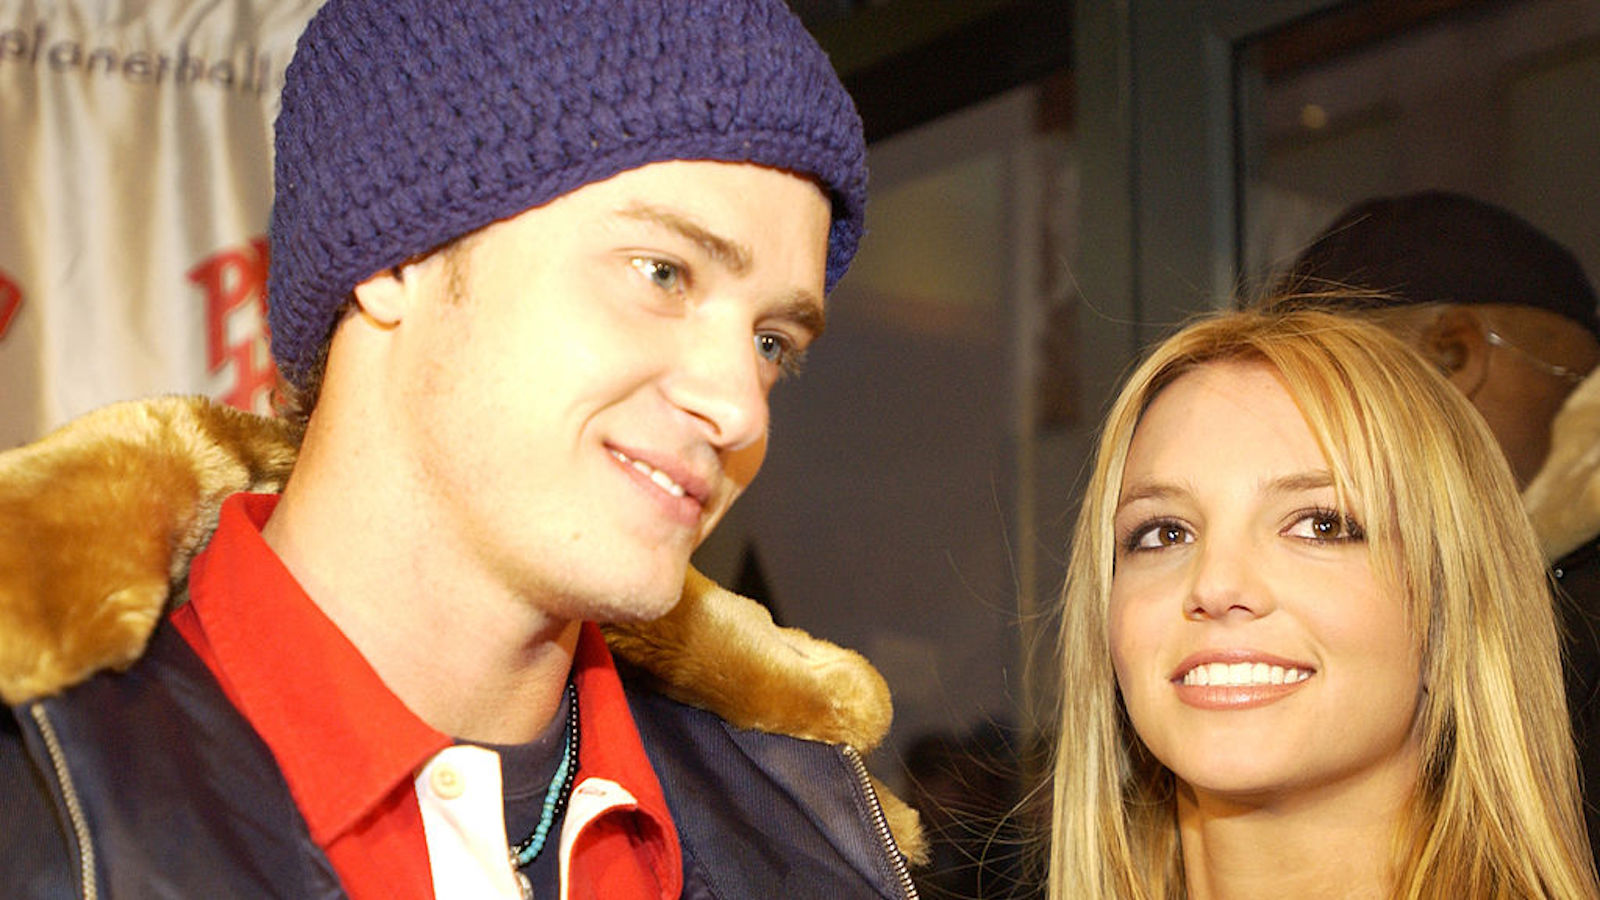 Britney Spears Says Justin Timberlake Got Her Pregnant, Had Abortion,  Memoir Claims